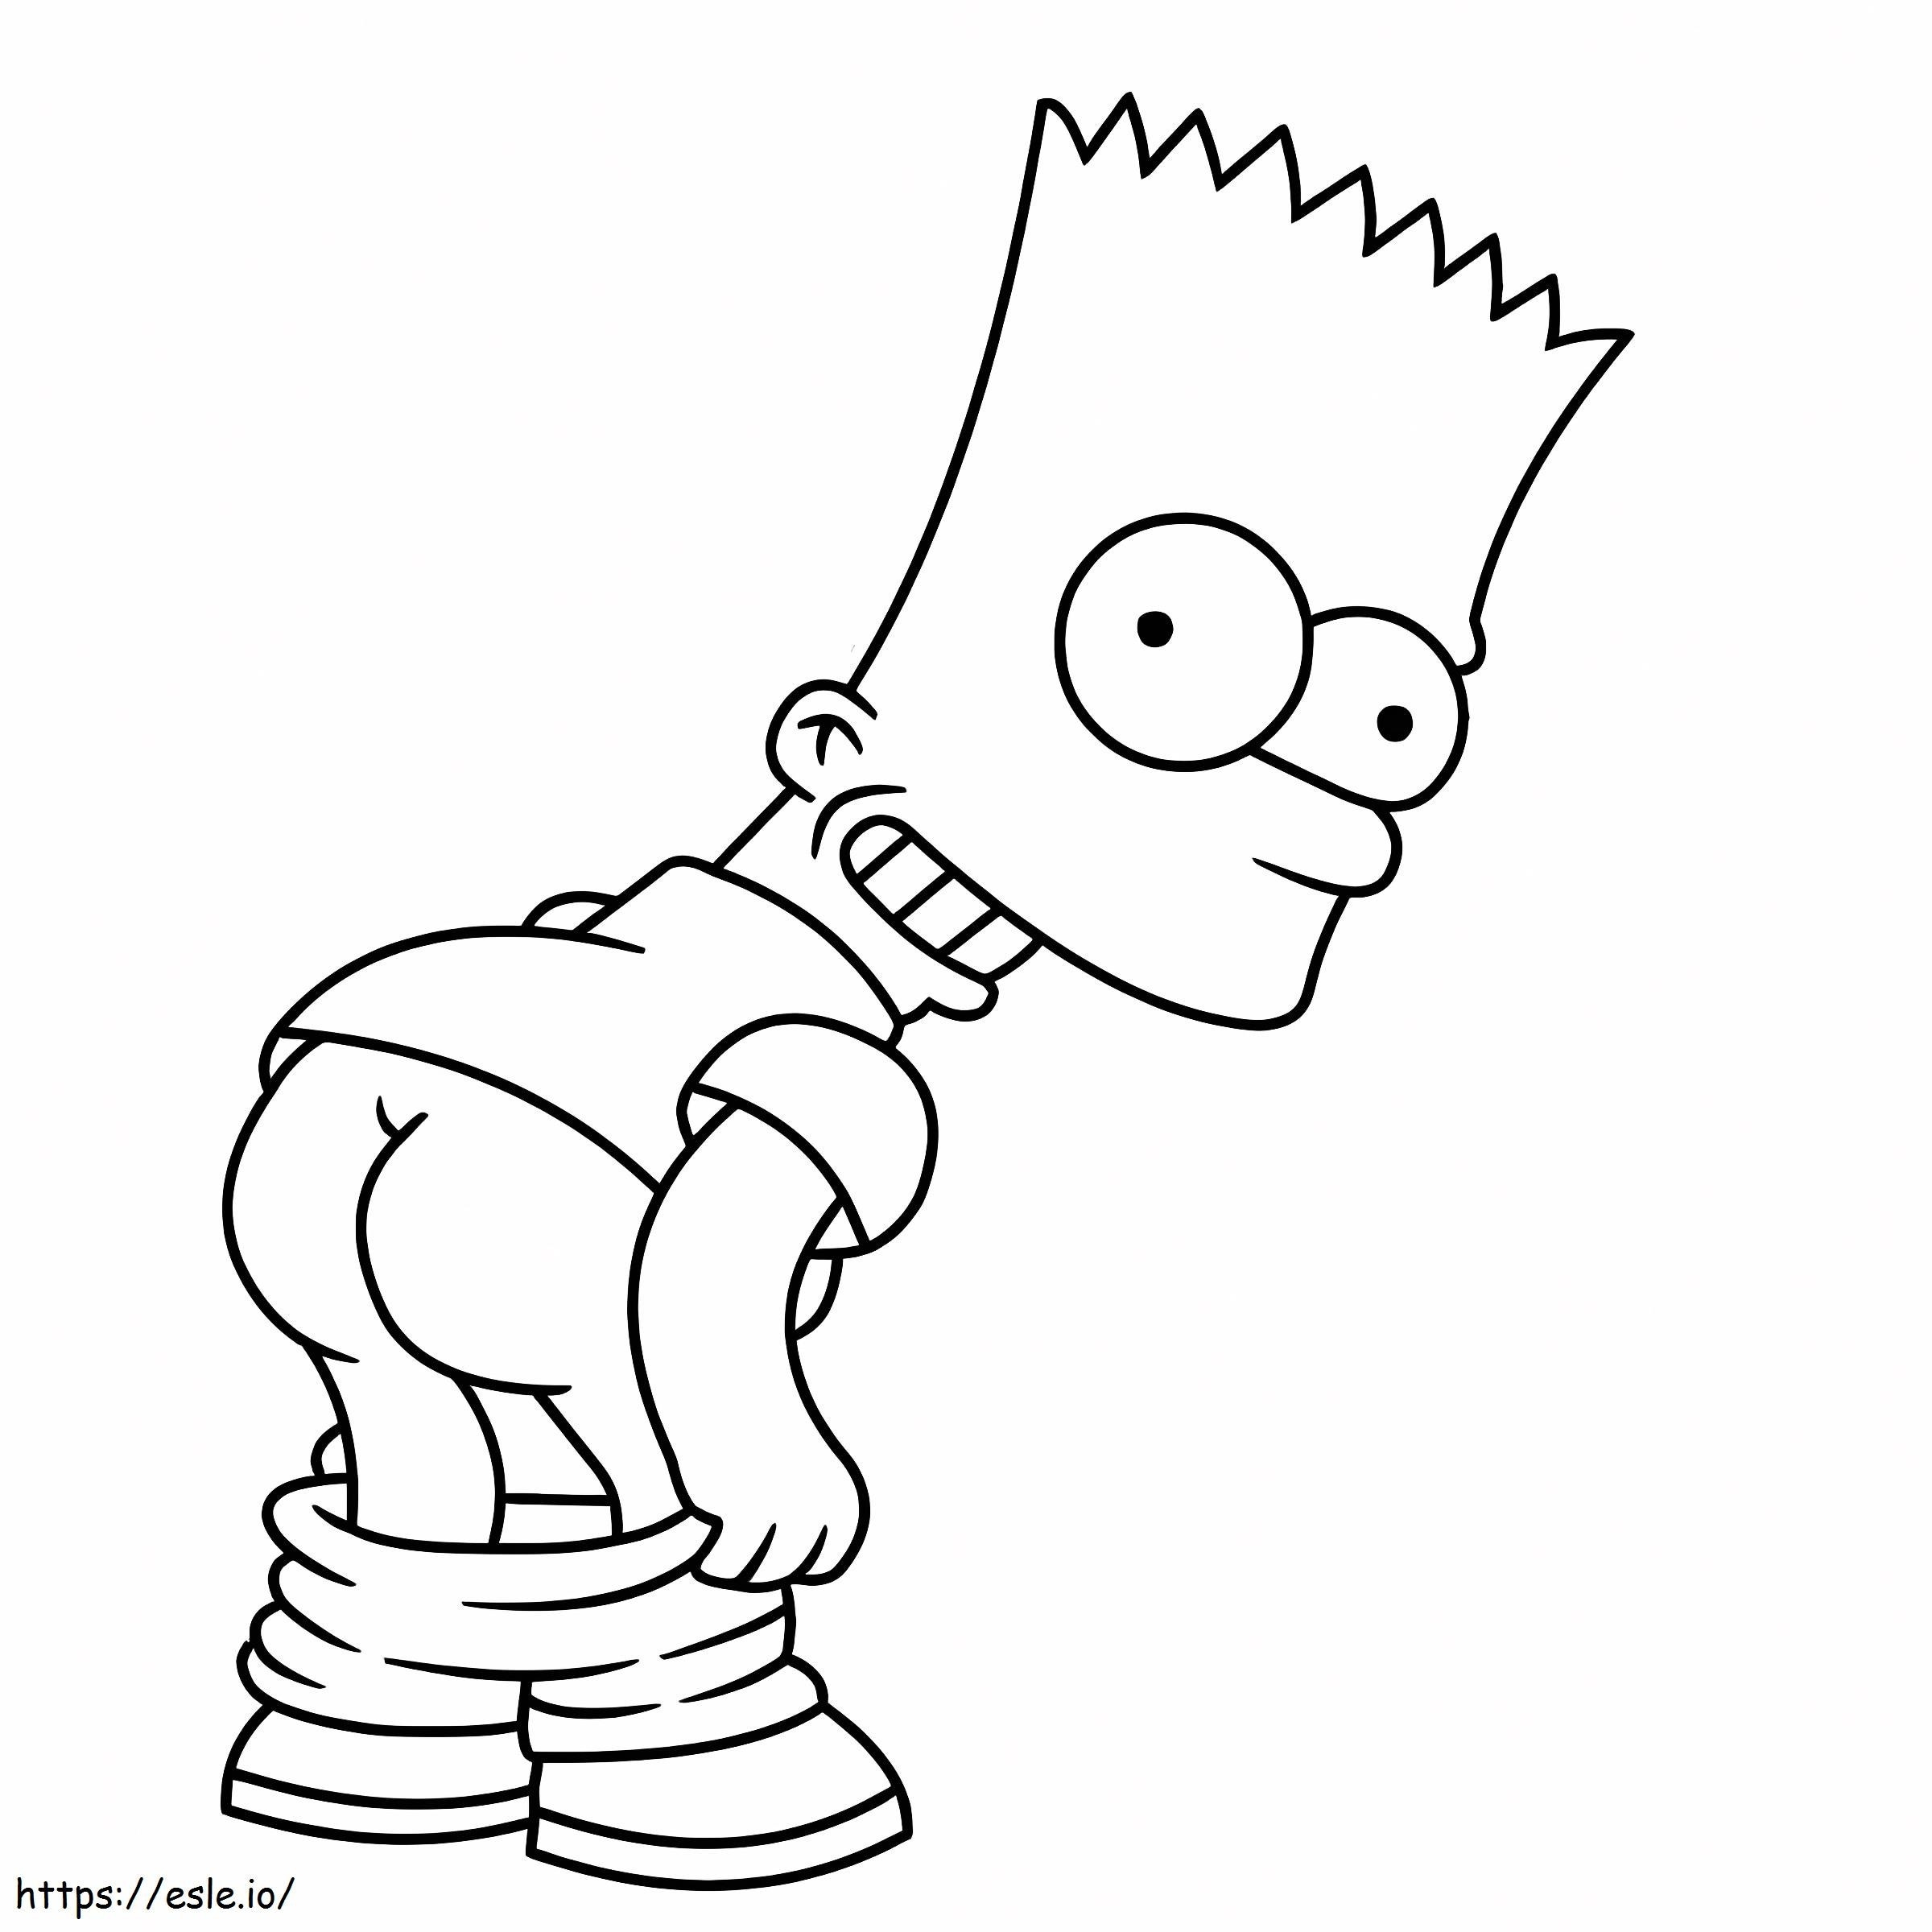 Bart Simpson Ass coloring page